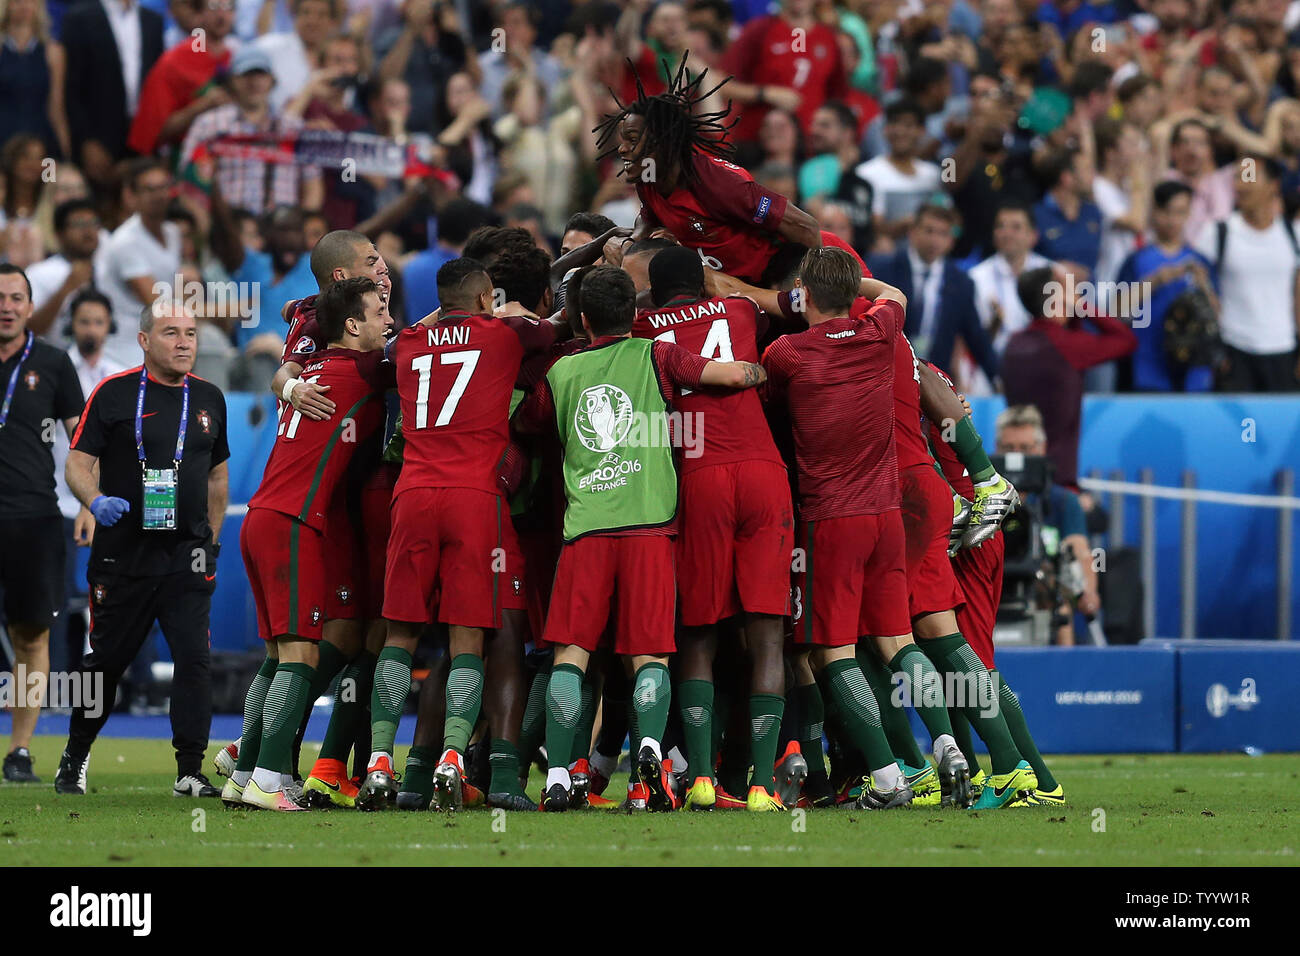 Eder of Portugal is mobbed by his team-mates after scoring the winning goal during the Euro 2016 Final match at the Stade de France in Paris, France on July 10, 2016. Portugal beat France 1-0 after extra-time to secure their first European Championship. Photo by Chris Brunskill/UPI Stock Photo